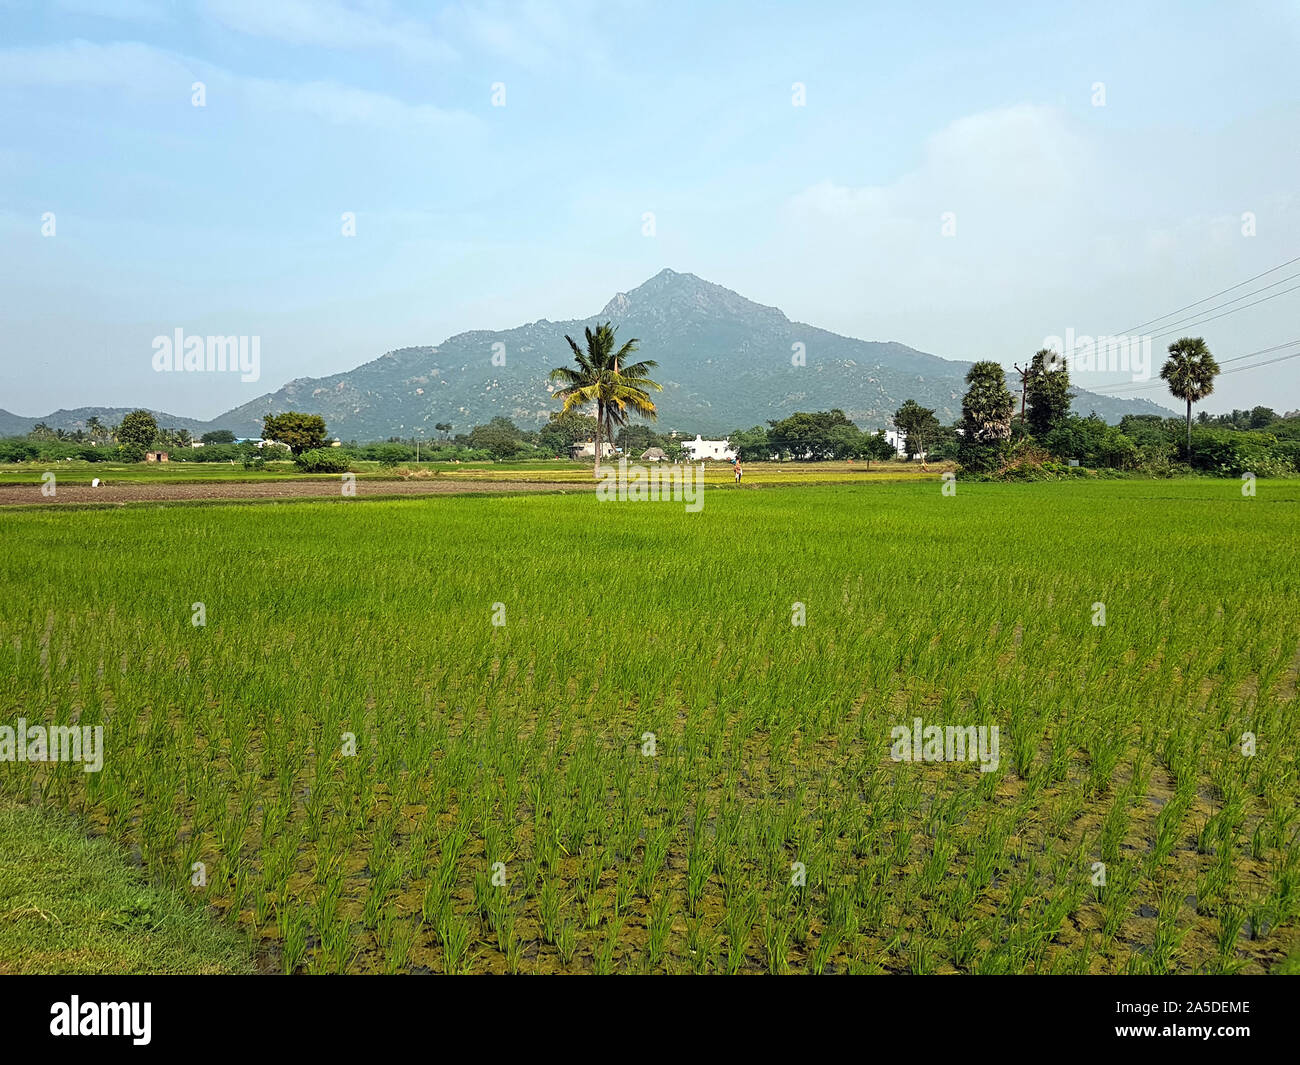 The mountain Arunachala is the oldest mountain on earth and modern research has confirmed that Arunachala is older than the Himalaya's and indeed one Stock Photo